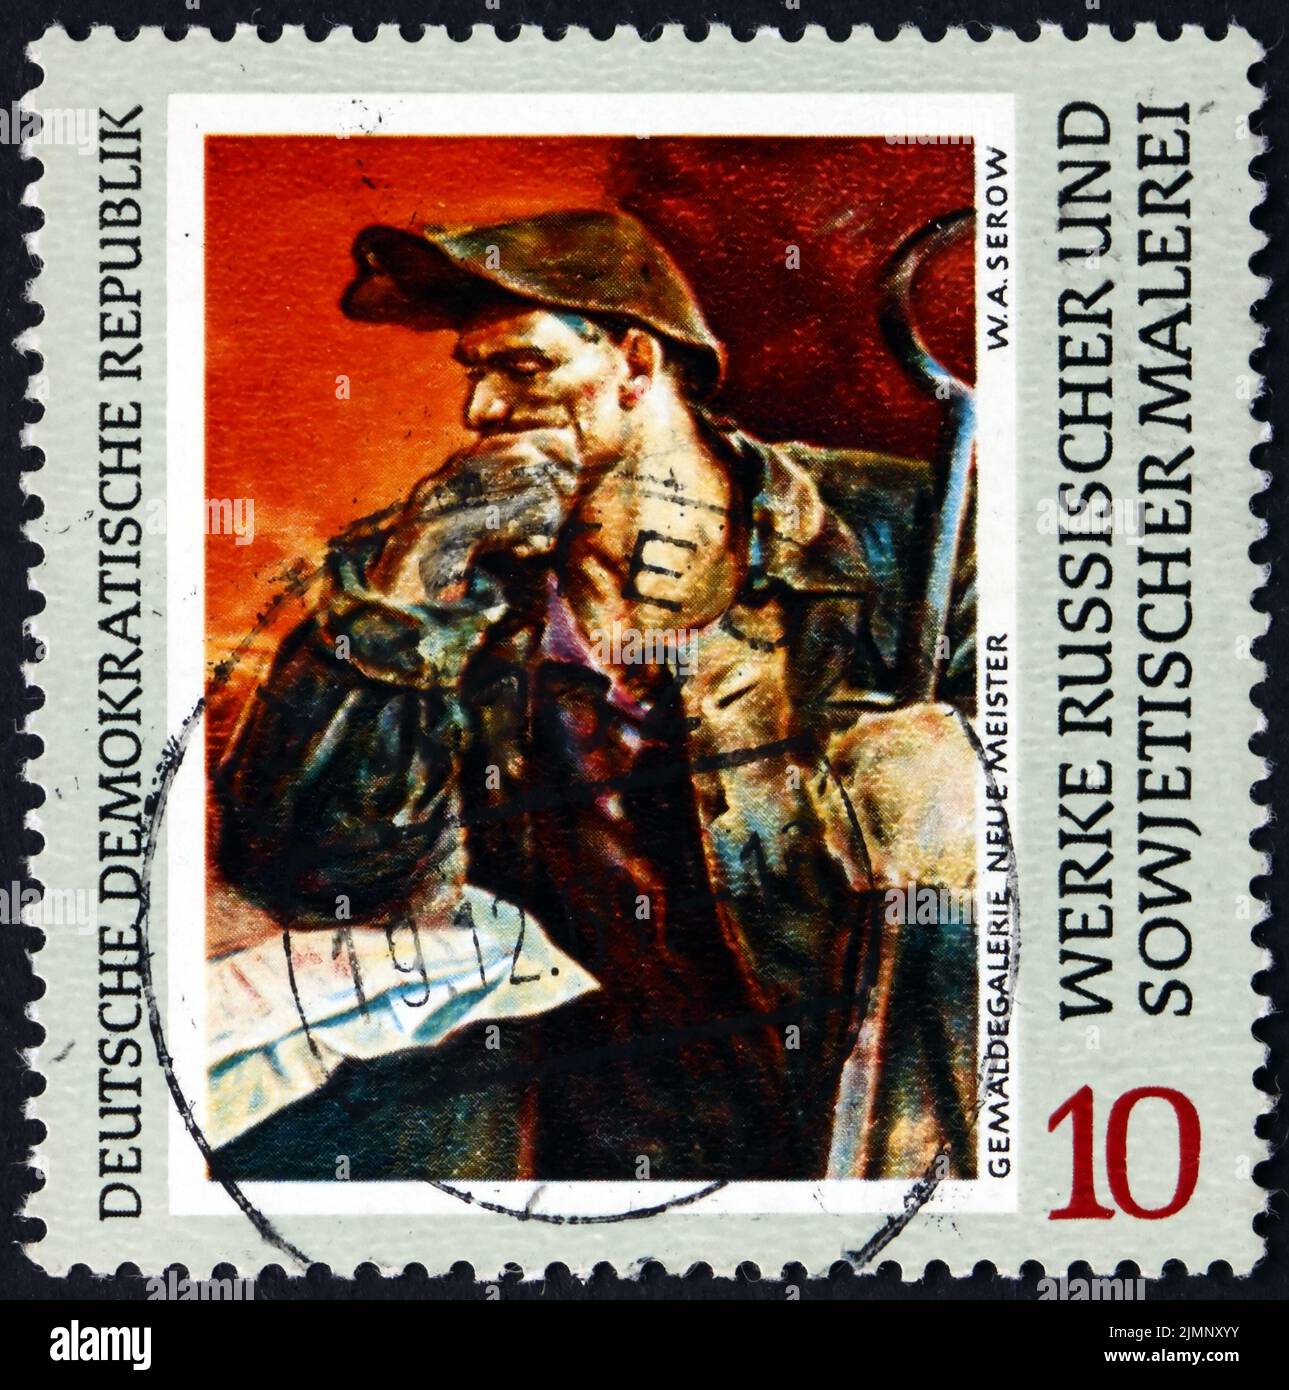 GERMANY - CIRCA 1969: a stamp printed in Germany shows steelworker, painting by V. A. Serov, Russian painter, circa 1969 Stock Photo